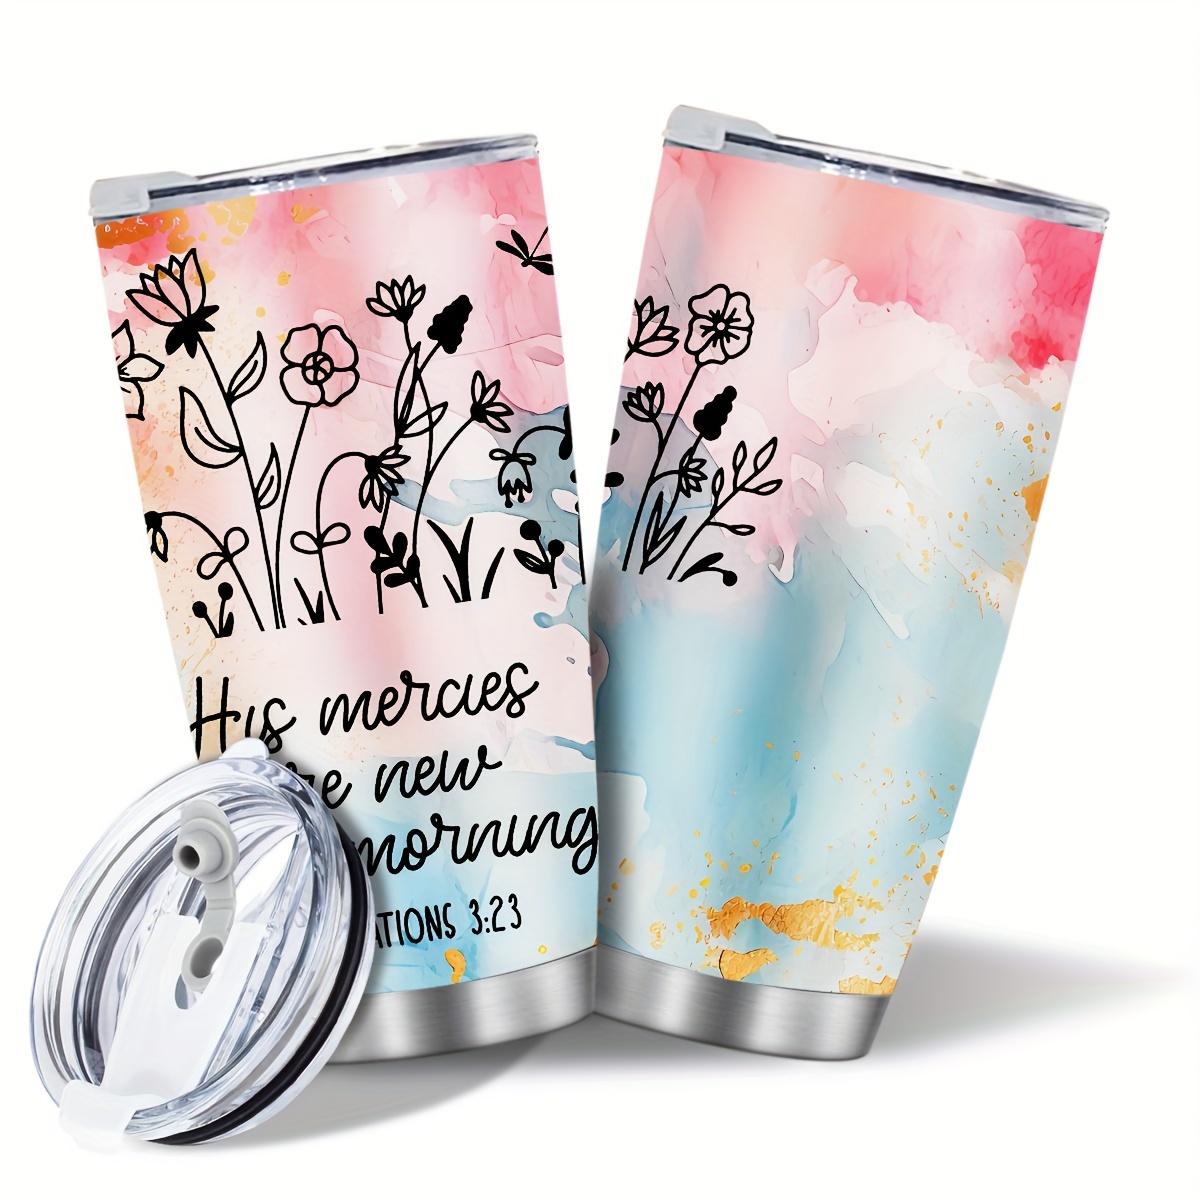  Christian Gifts for Women, Religious Gifts for Women